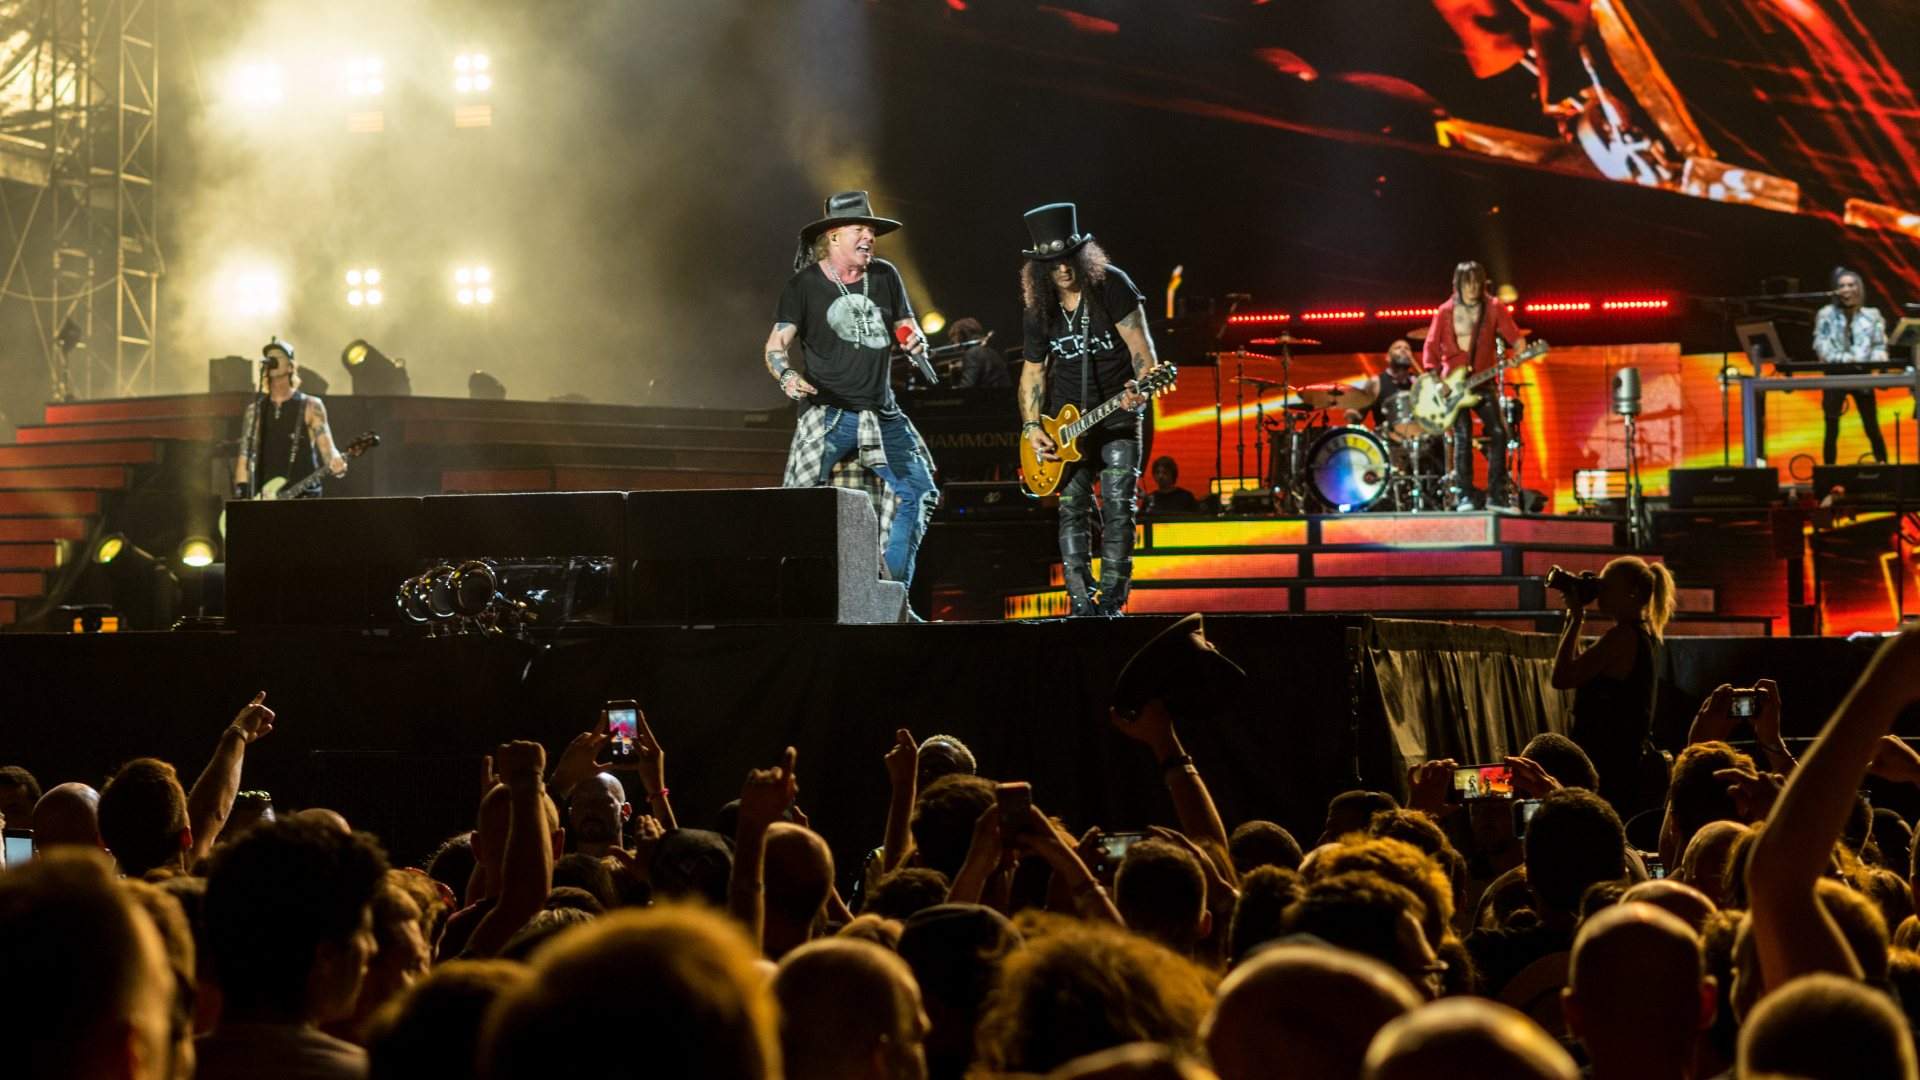 Guns N' Roses Have Announced a 2021 Stadium Tour of Australia and New Zealand